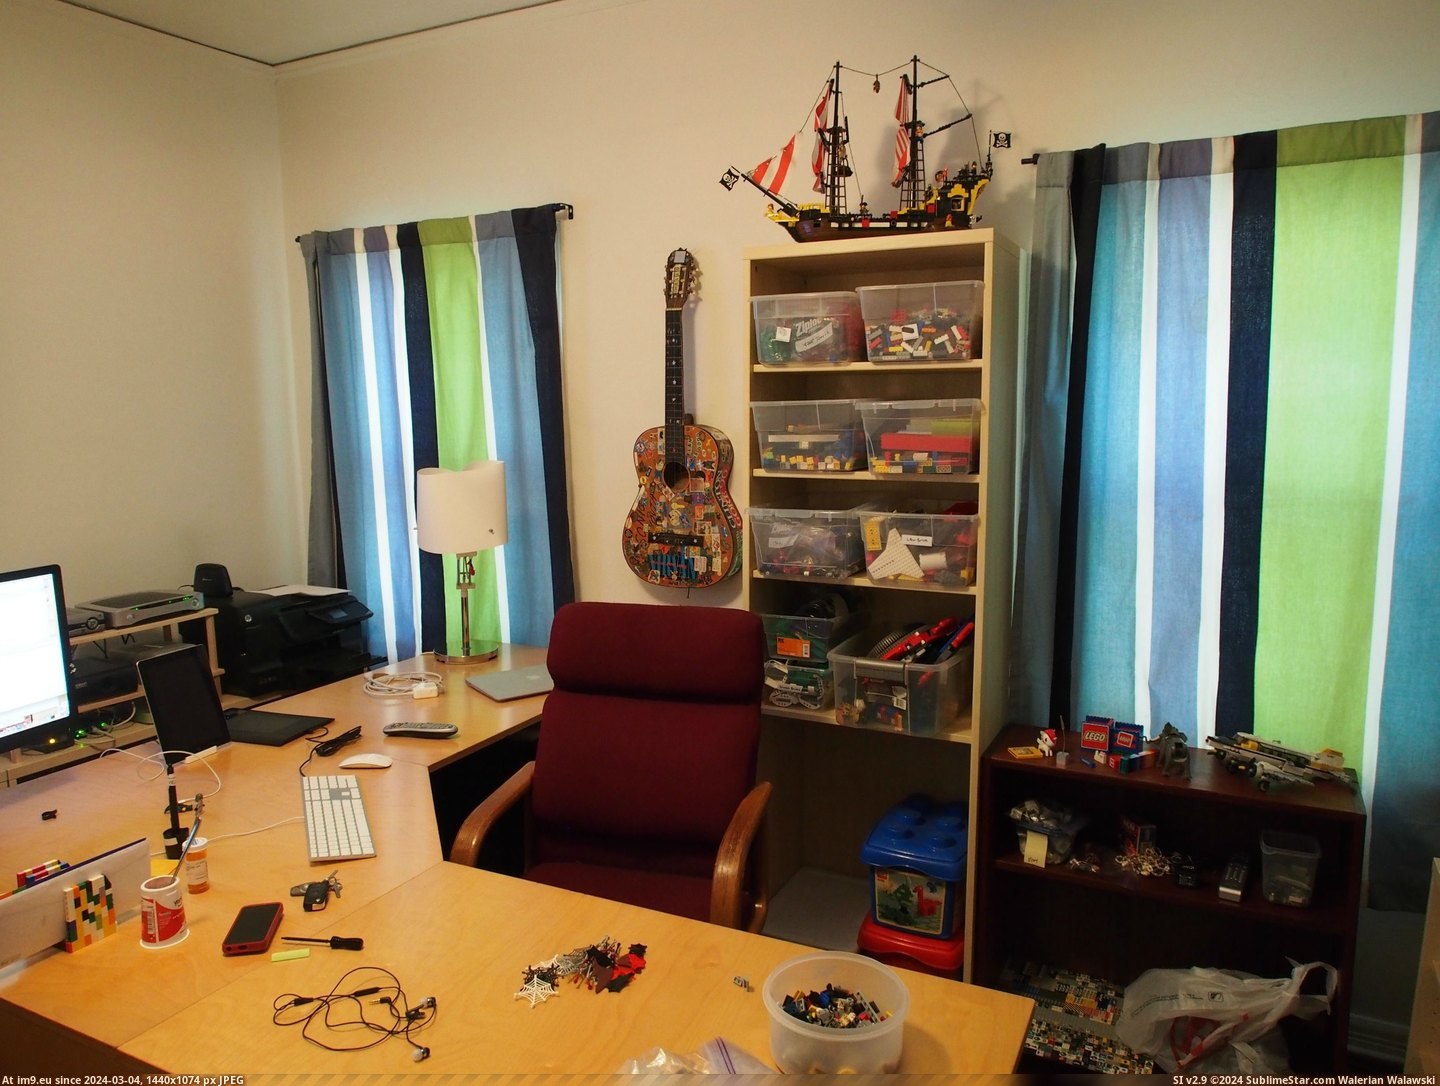 #Room #Lego #Finished #Finally [Pics] My Lego room is finally finished! 4 Pic. (Image of album My r/PICS favs))